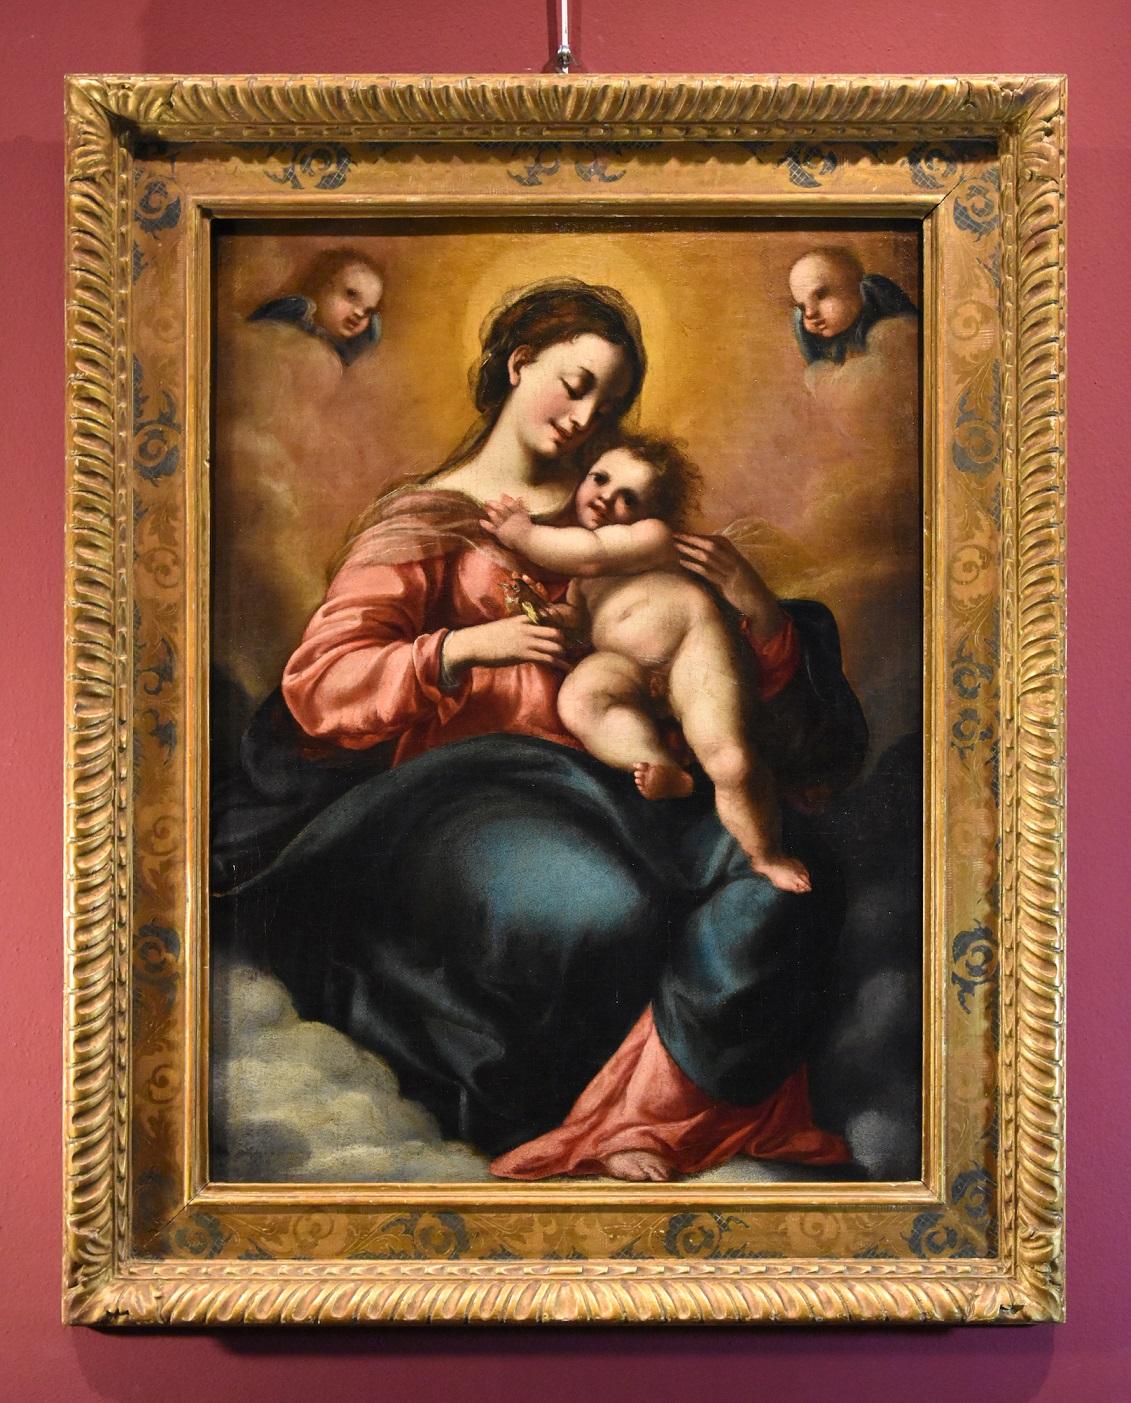 Jacopo Confortini (Florence 1602-1672) Portrait Painting - Confortini Mary Madonna Angels Paint Oil on canvas Old master 17th Century Italy